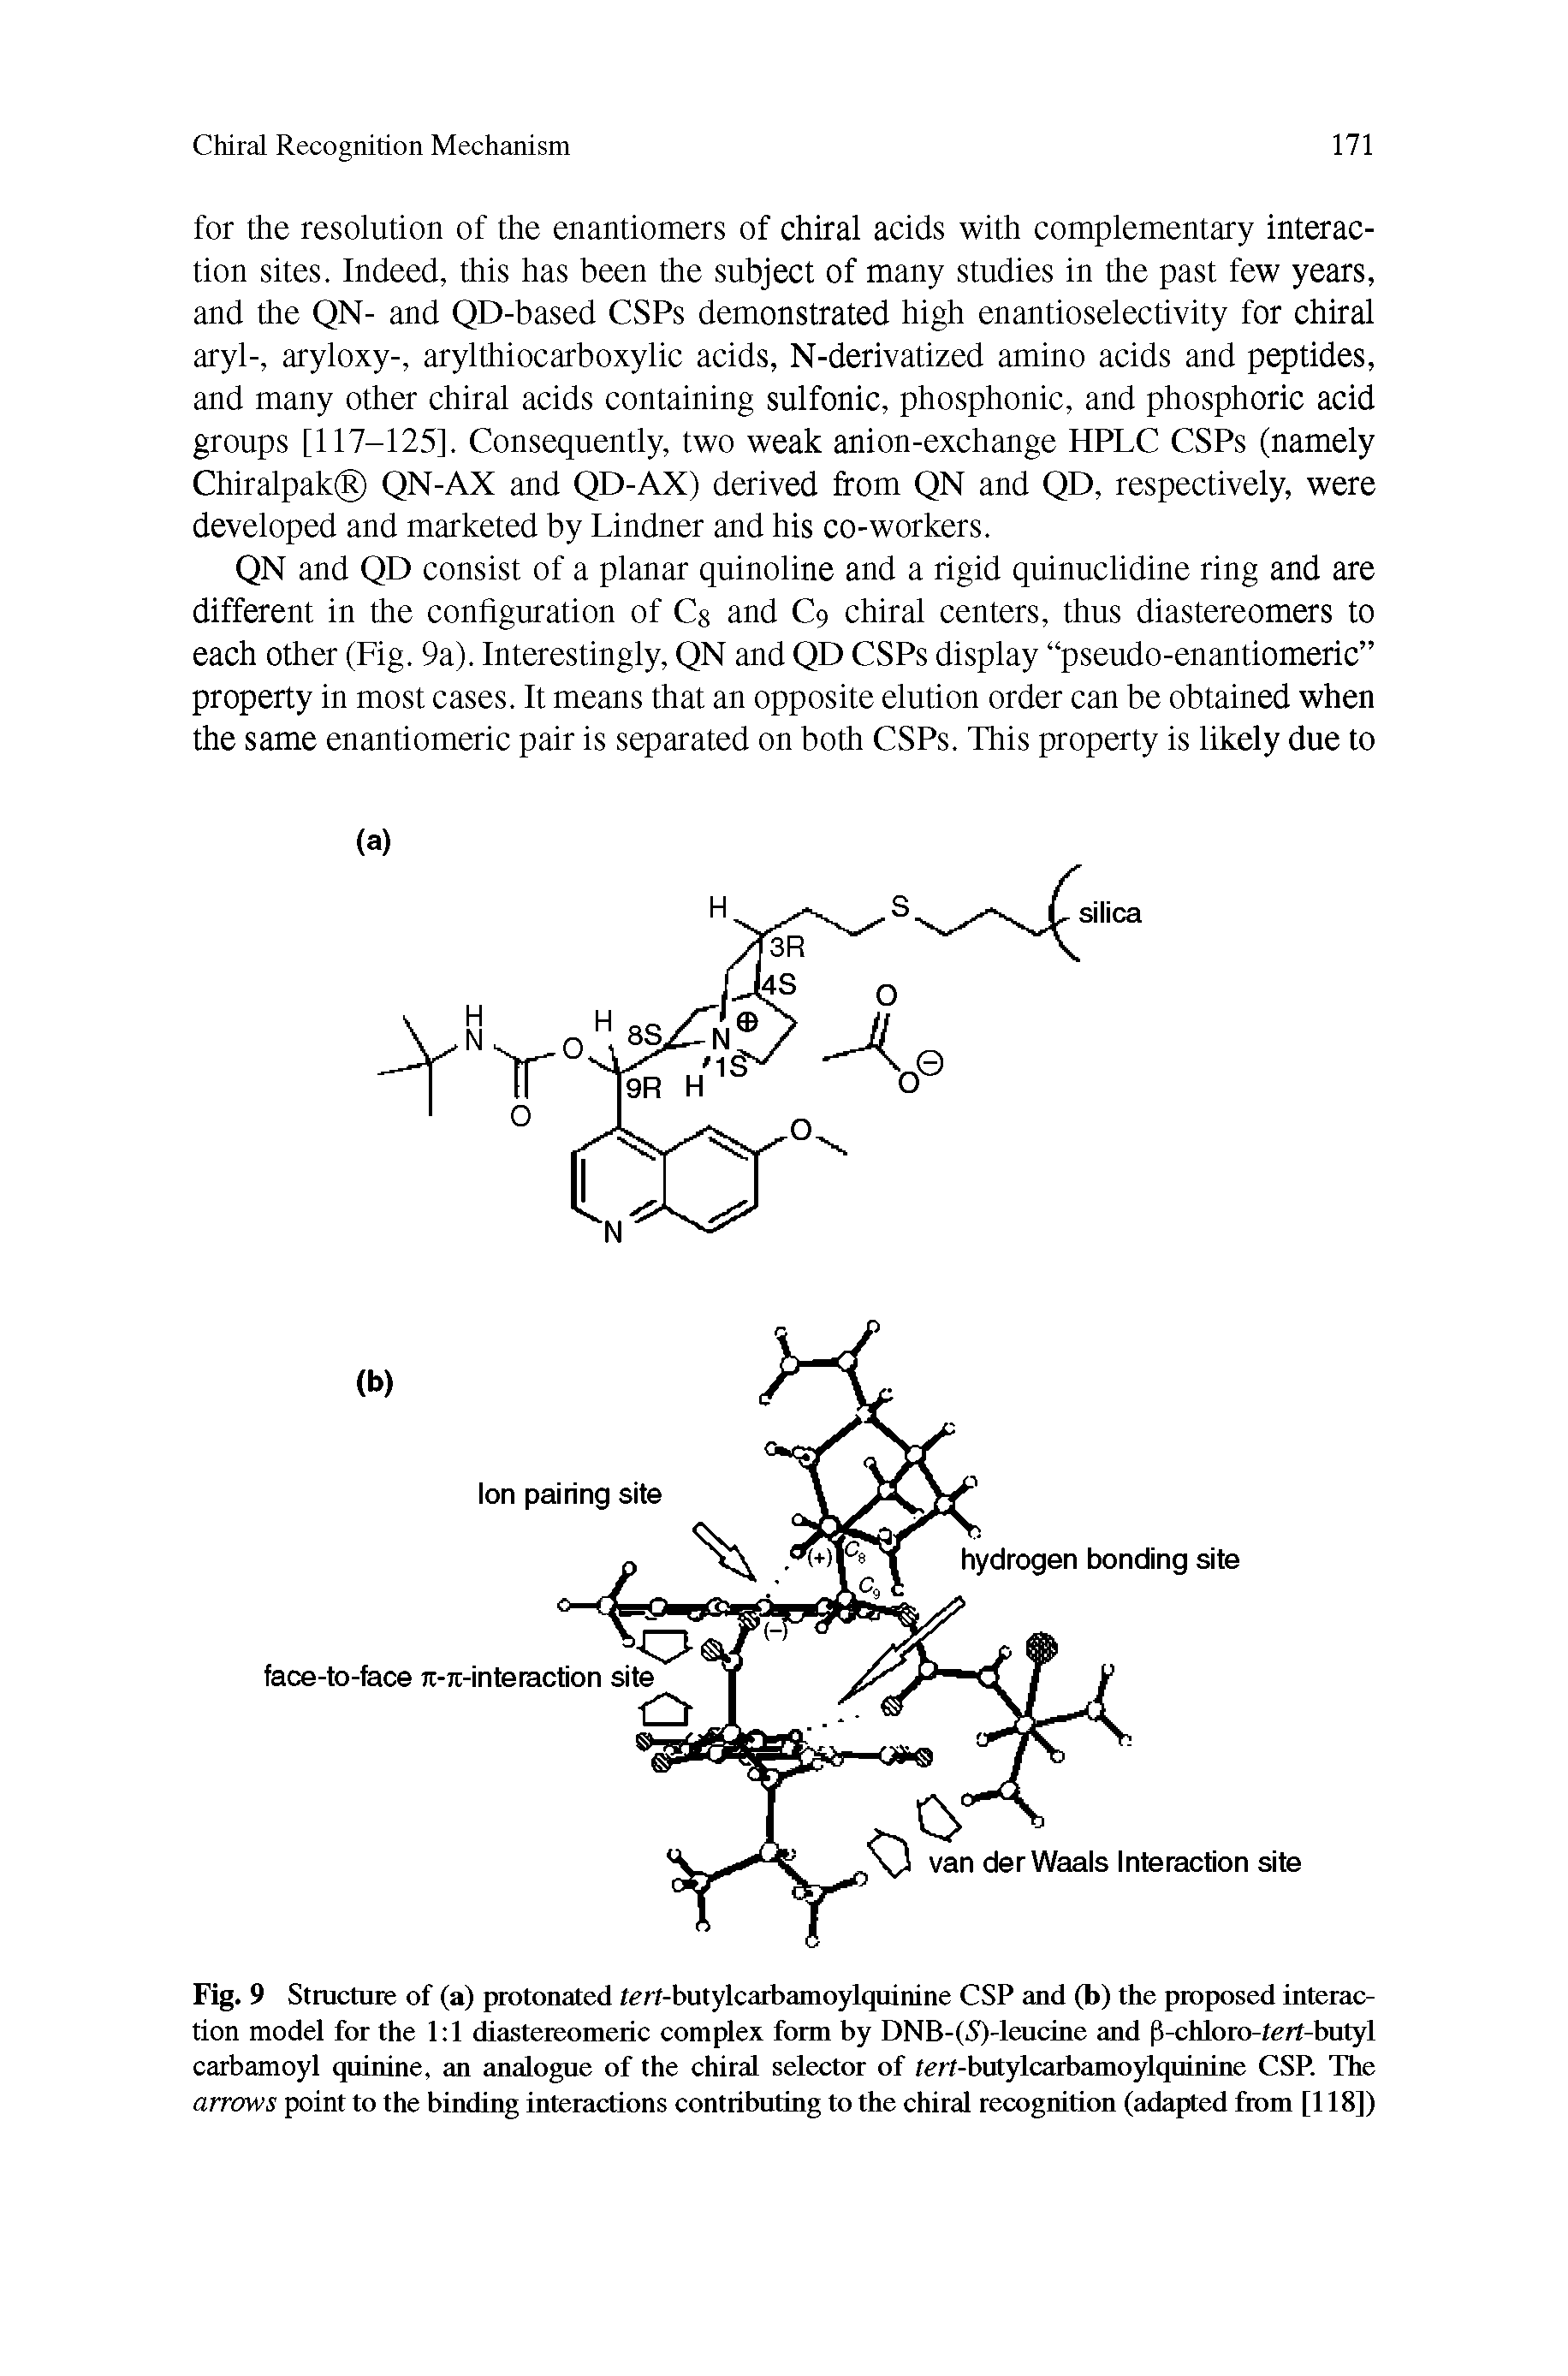 Fig. 9 Structure of (a) protonated t rt-butylcarbamoylquinine CSP and (b) the proposed interaction model for the 1 1 diastereomeric complex form by DNB-(5)-leucine and P-chloro-tert-butyl carbamoyl quinine, an analogue of the chirtil selector of /ert-butylcarbamoylquinine CSP. The arrows point to the binding interactions contributing to the chiral recognition (adapted from [118])...